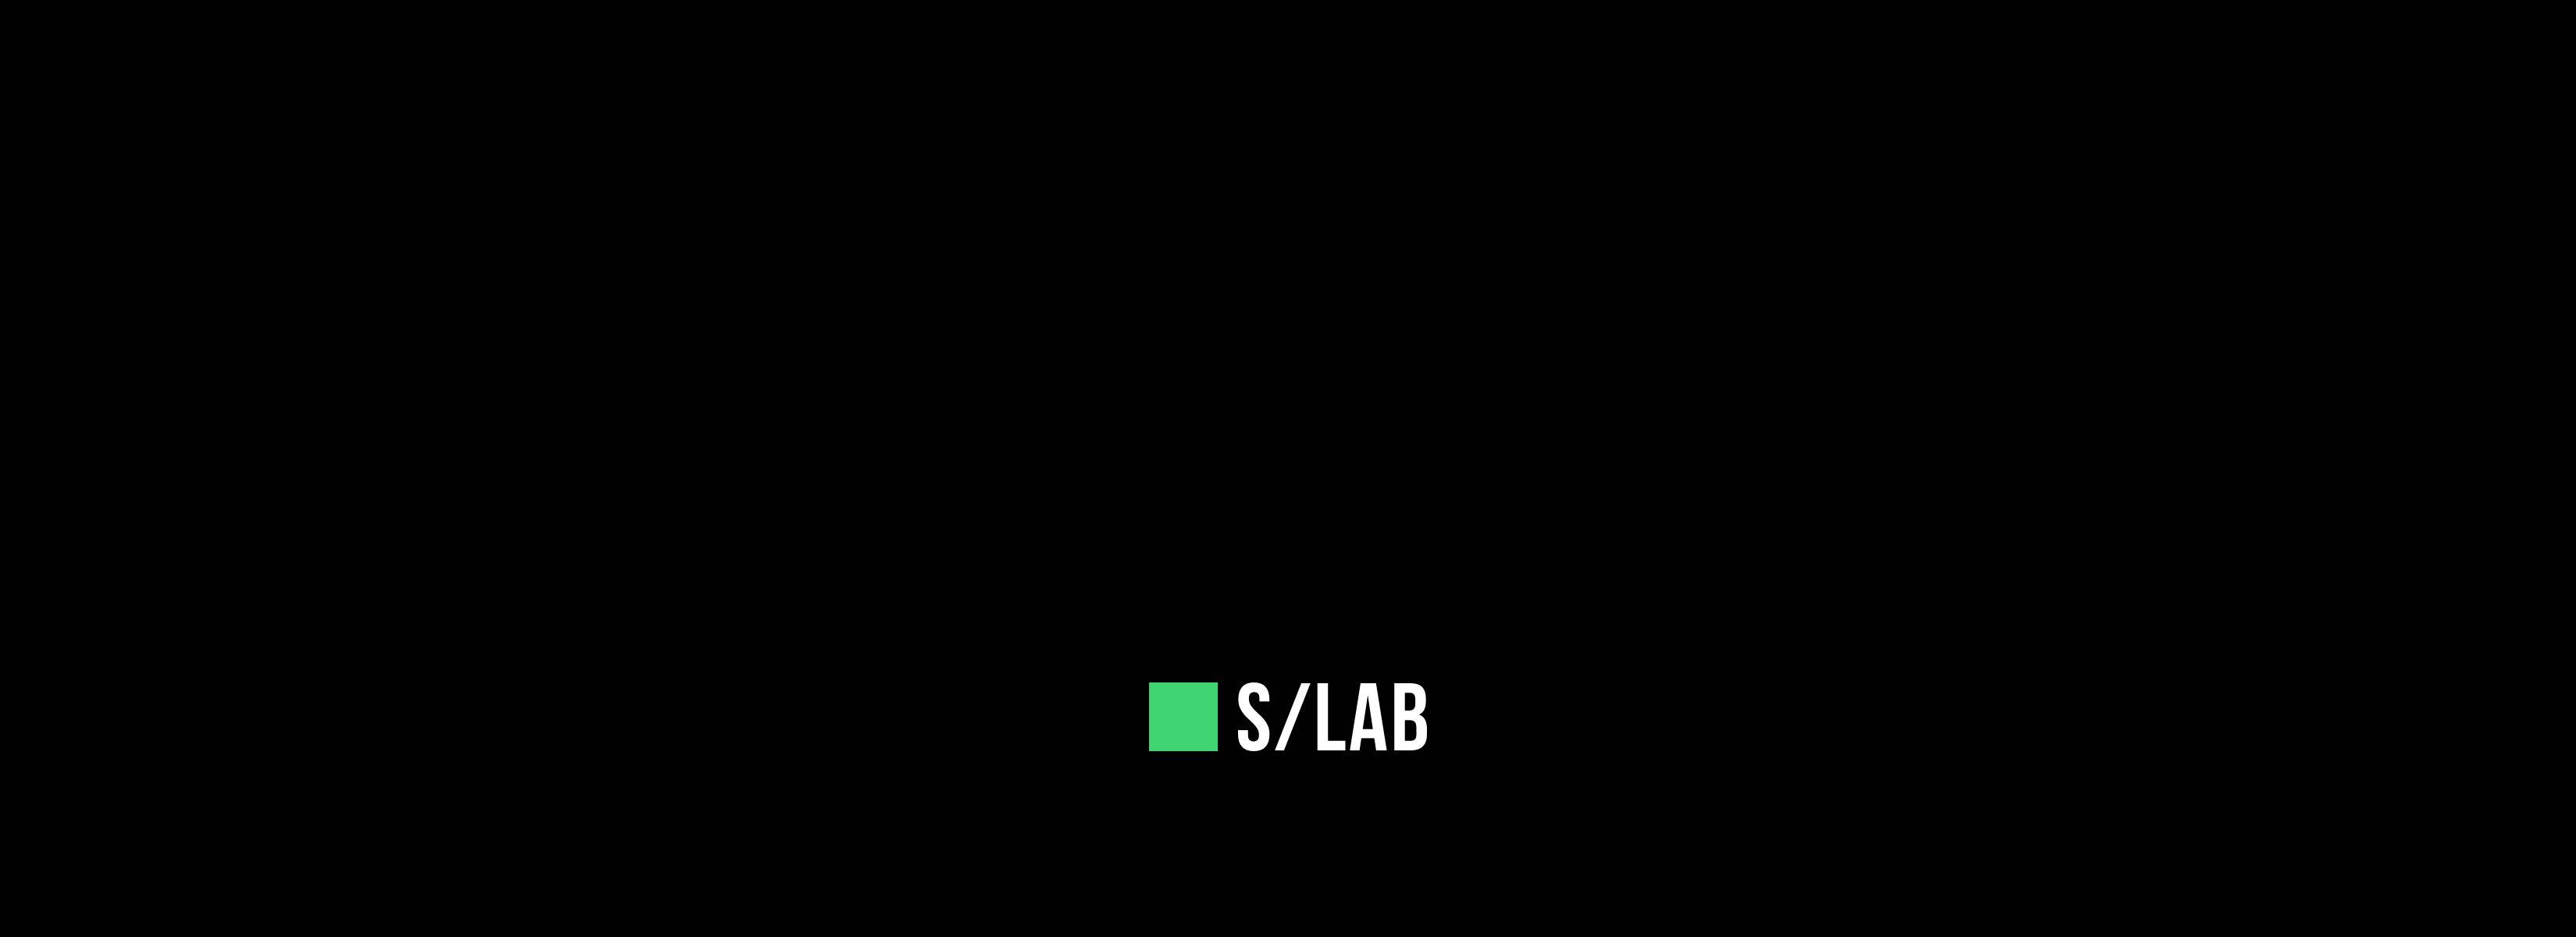 Skcript Announces S/LAB - A nested Startup Within Skcript